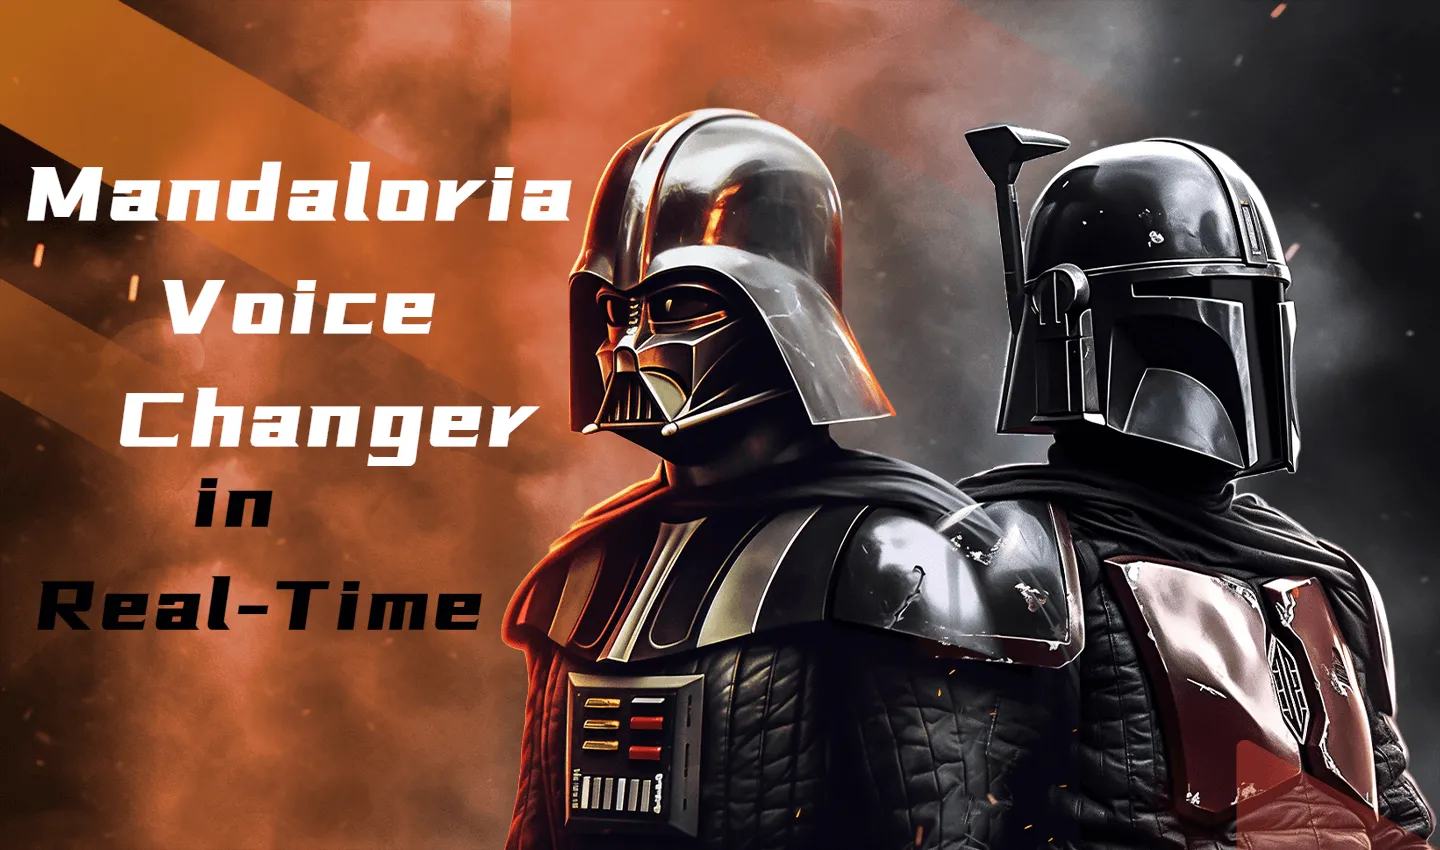 Use Mandalorian Voice Changer: Sound Like Mando in Real-Time